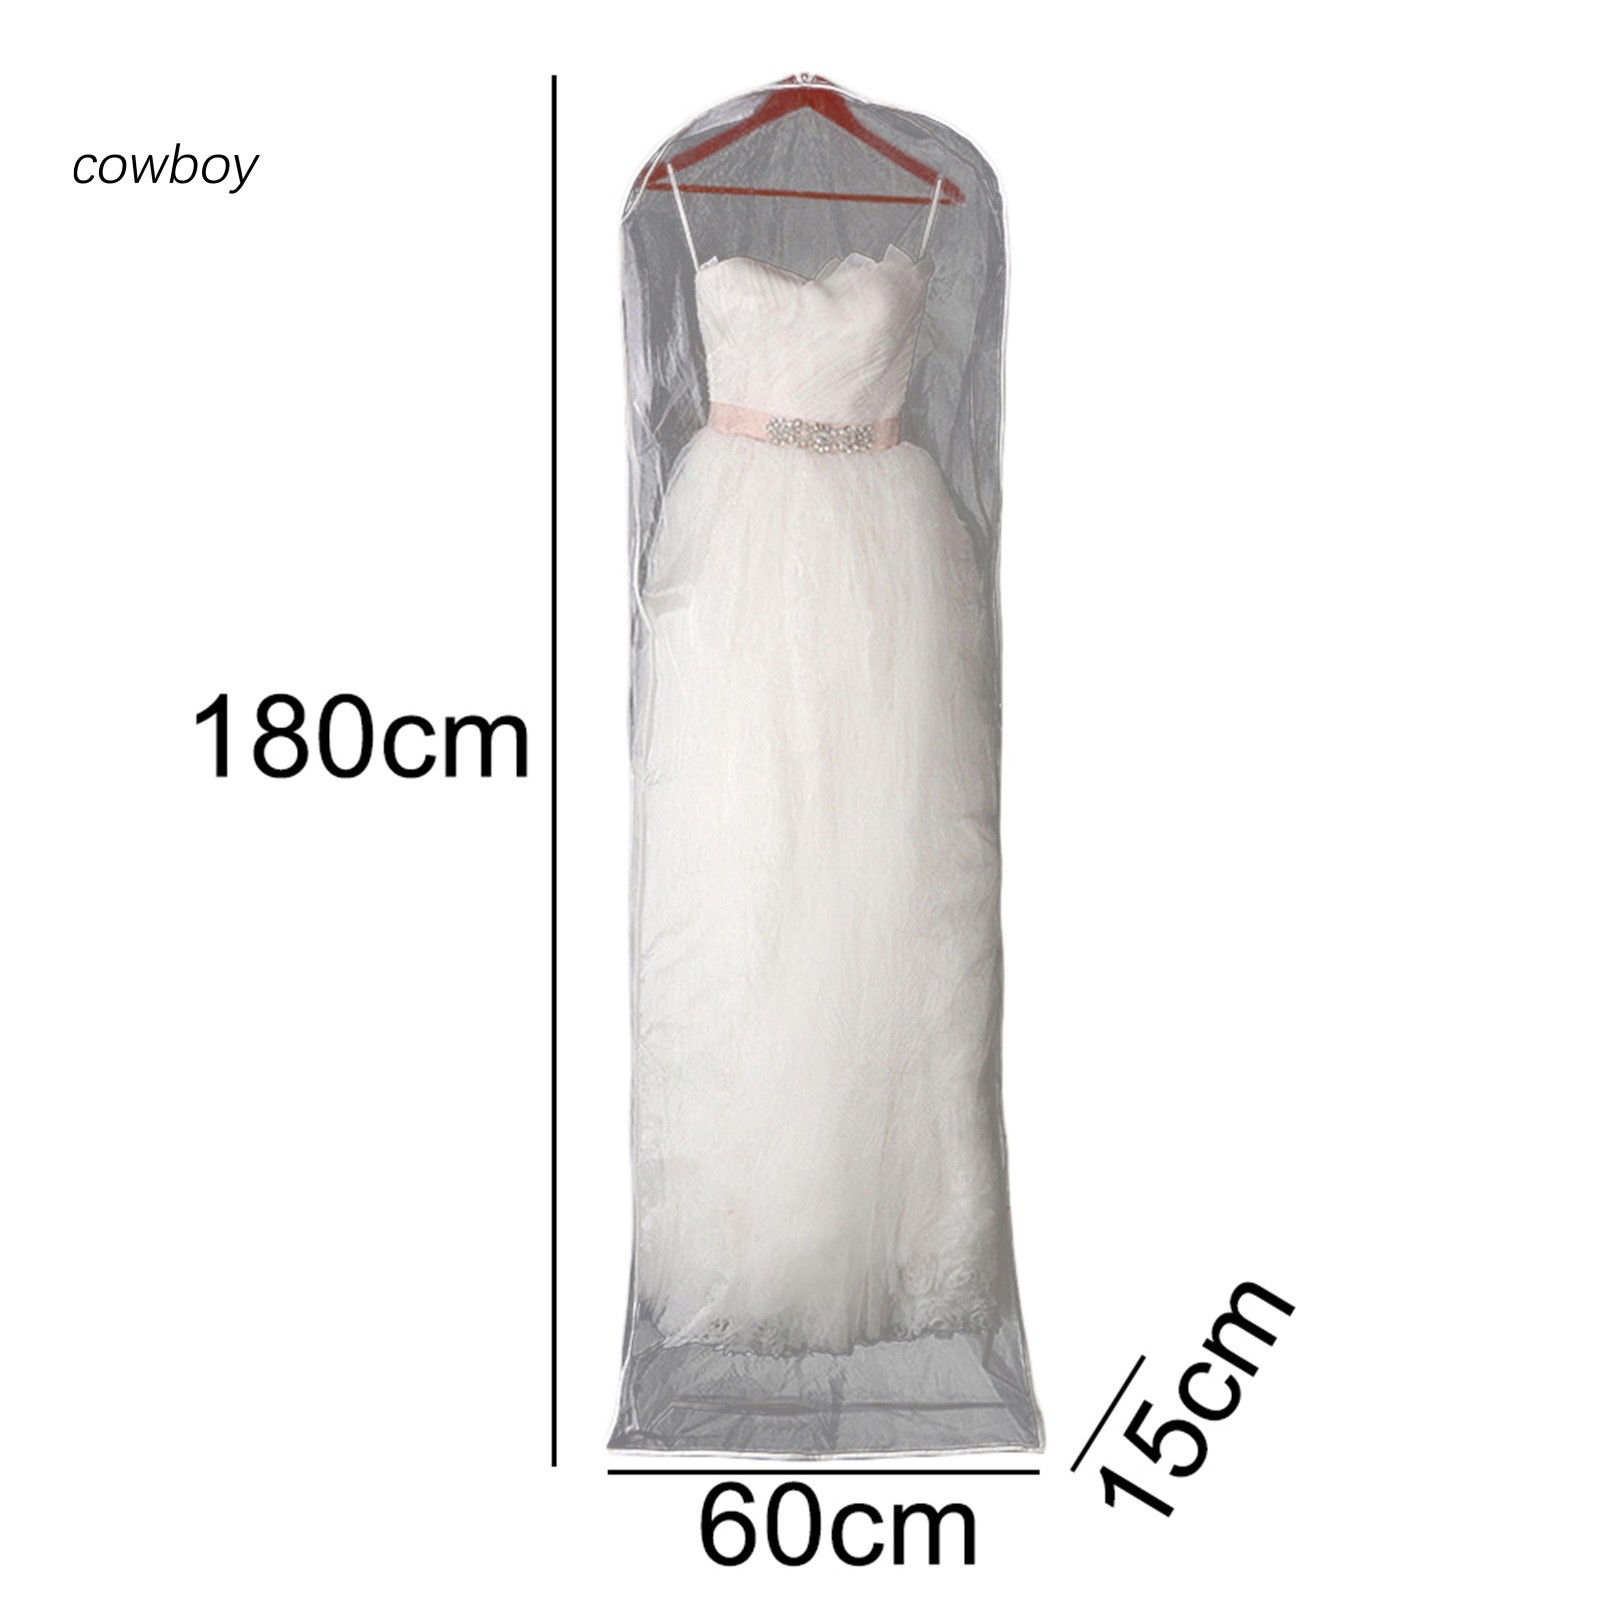 cowboy House  Life Classic Dress Protective Cover Dress Dust Shield Easy to Find Clothes for Photography Shop